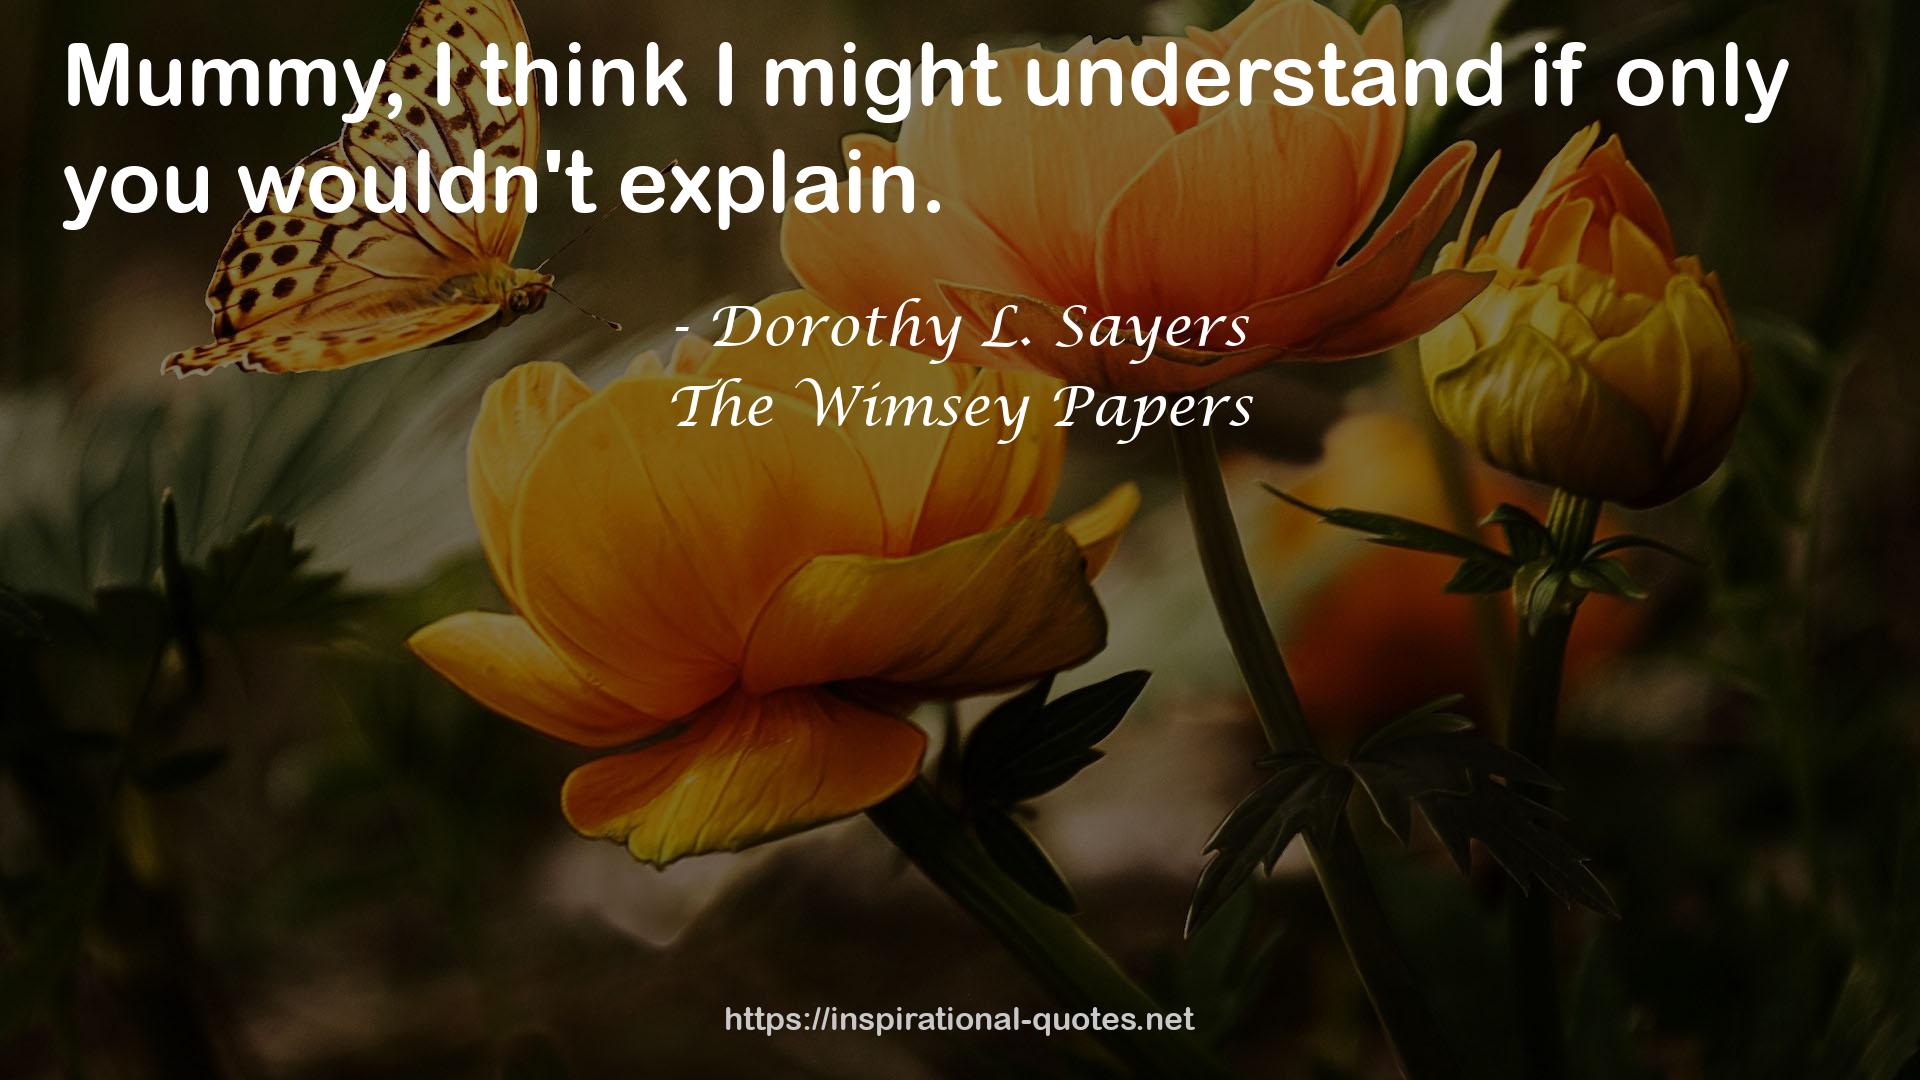 The Wimsey Papers QUOTES